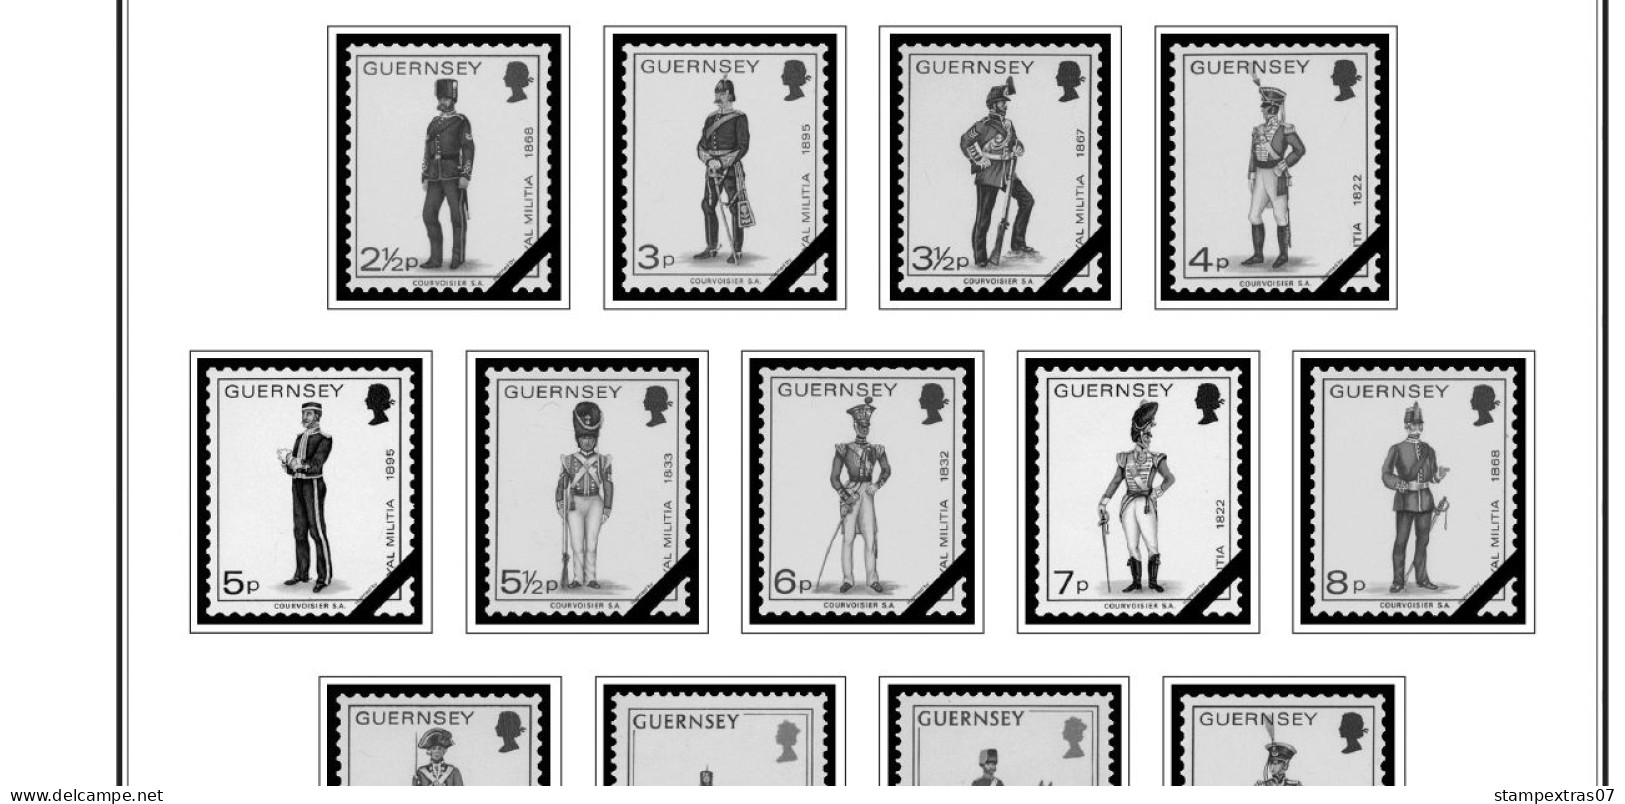 GB GUERNSEY 1958-2010 + 2011- 2020 STAMP ALBUM PAGES (212 B&w Illustrated Pages) - Inglese